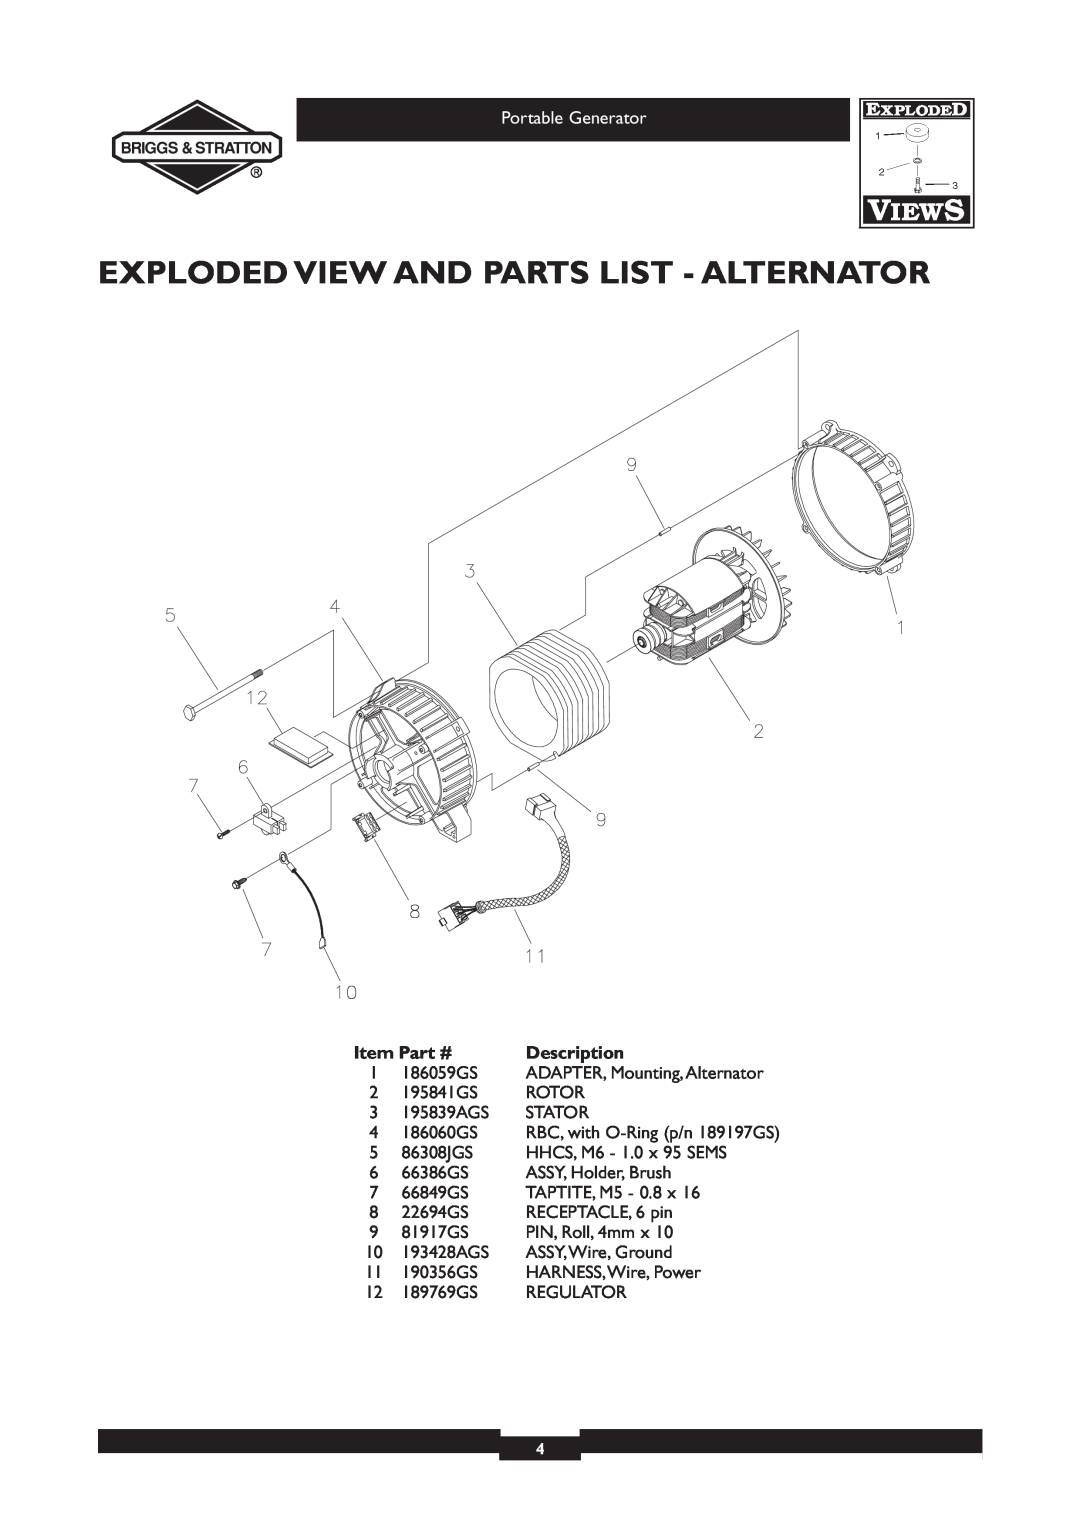 Briggs & Stratton 30213 operating instructions Exploded View And Parts List - Alternator, Portable Generator, Description 